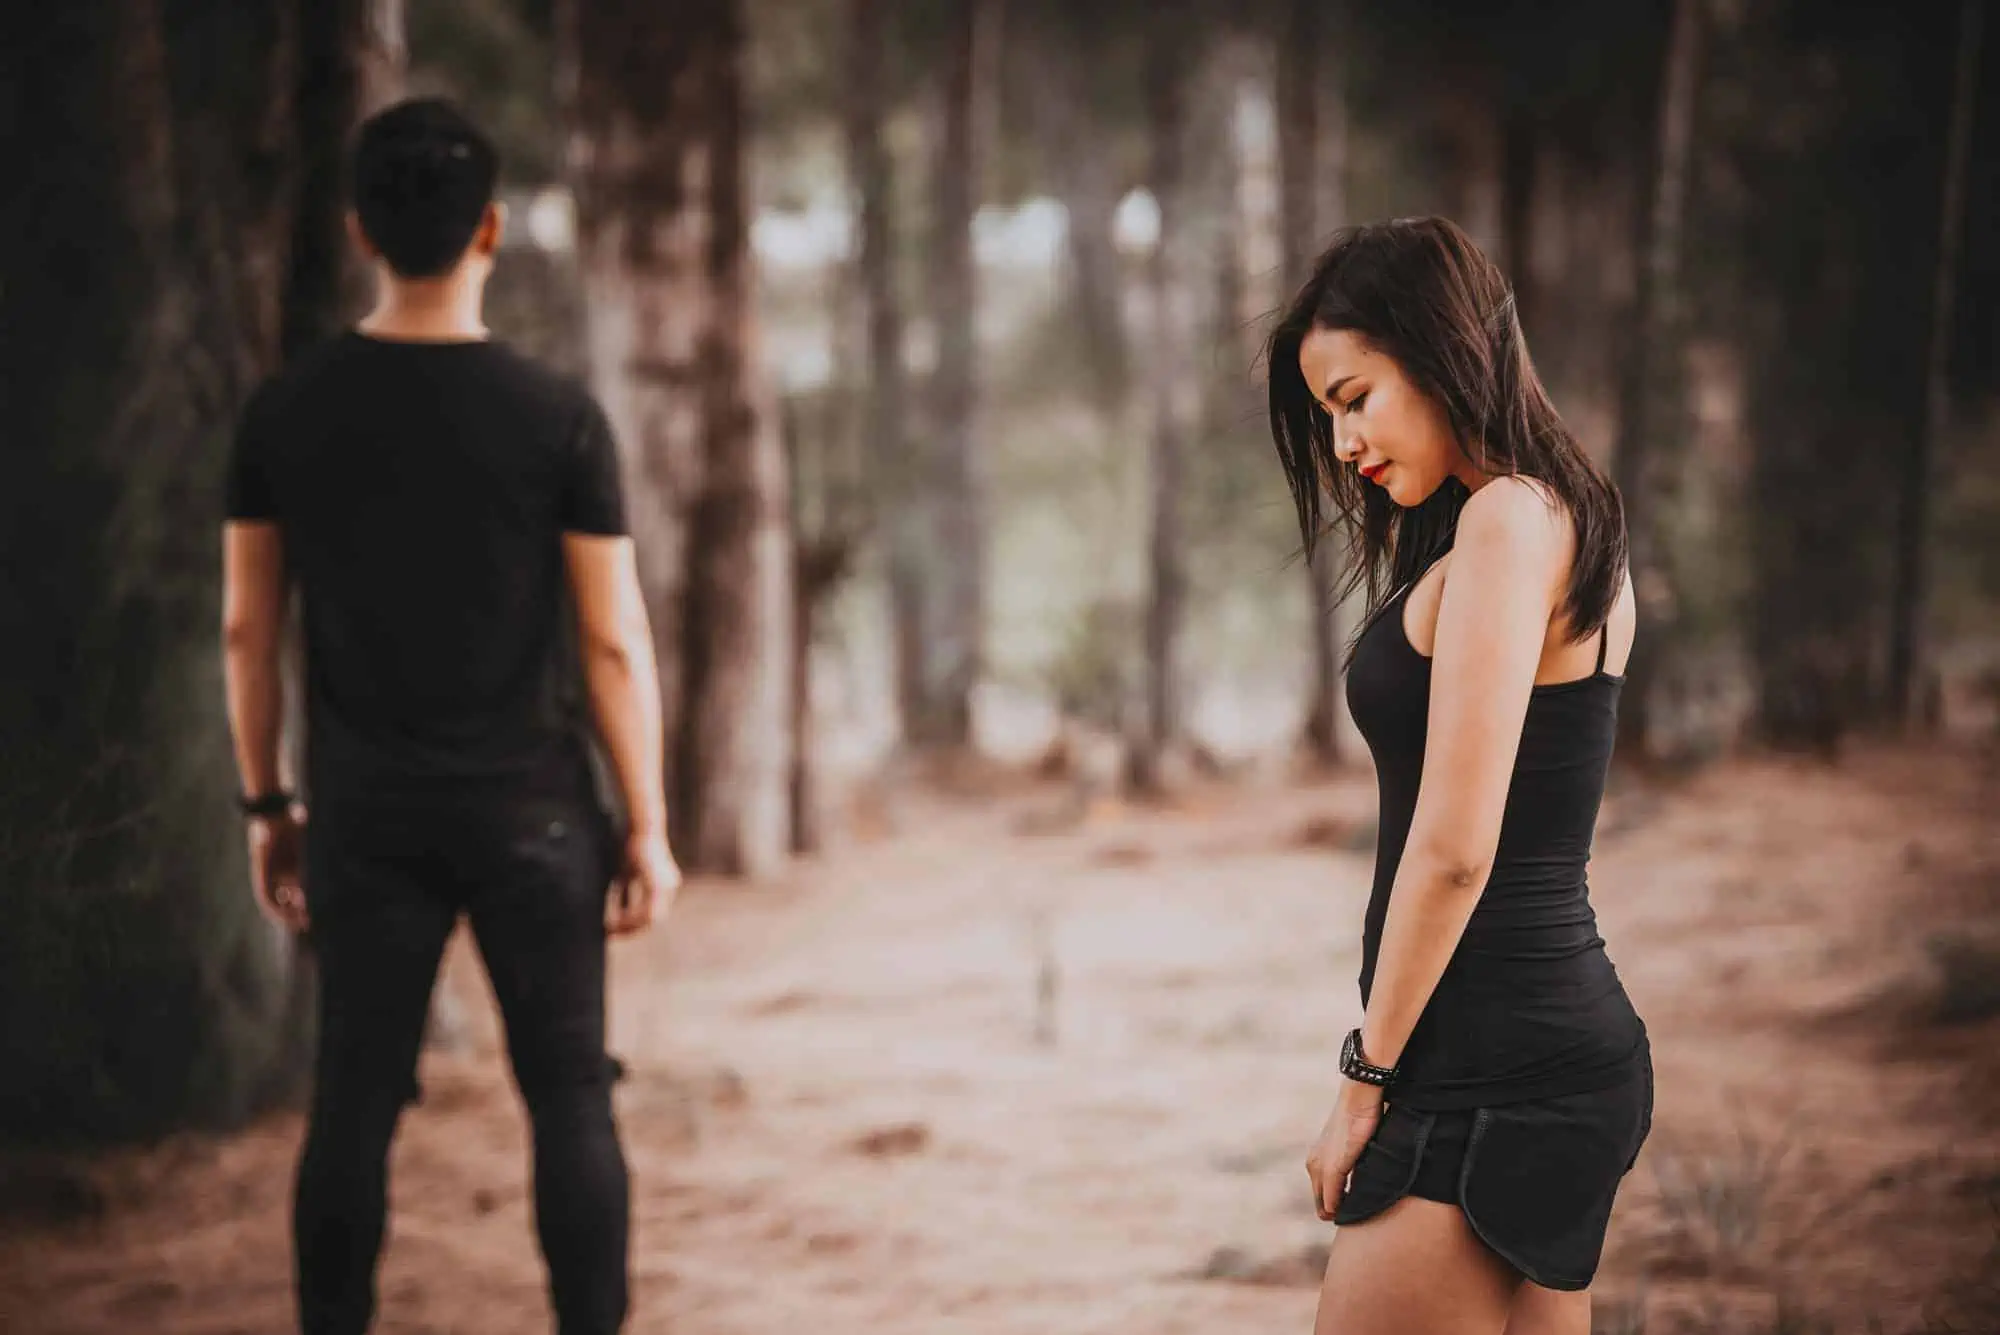 A woman in a black dress standing next to a man in a forest